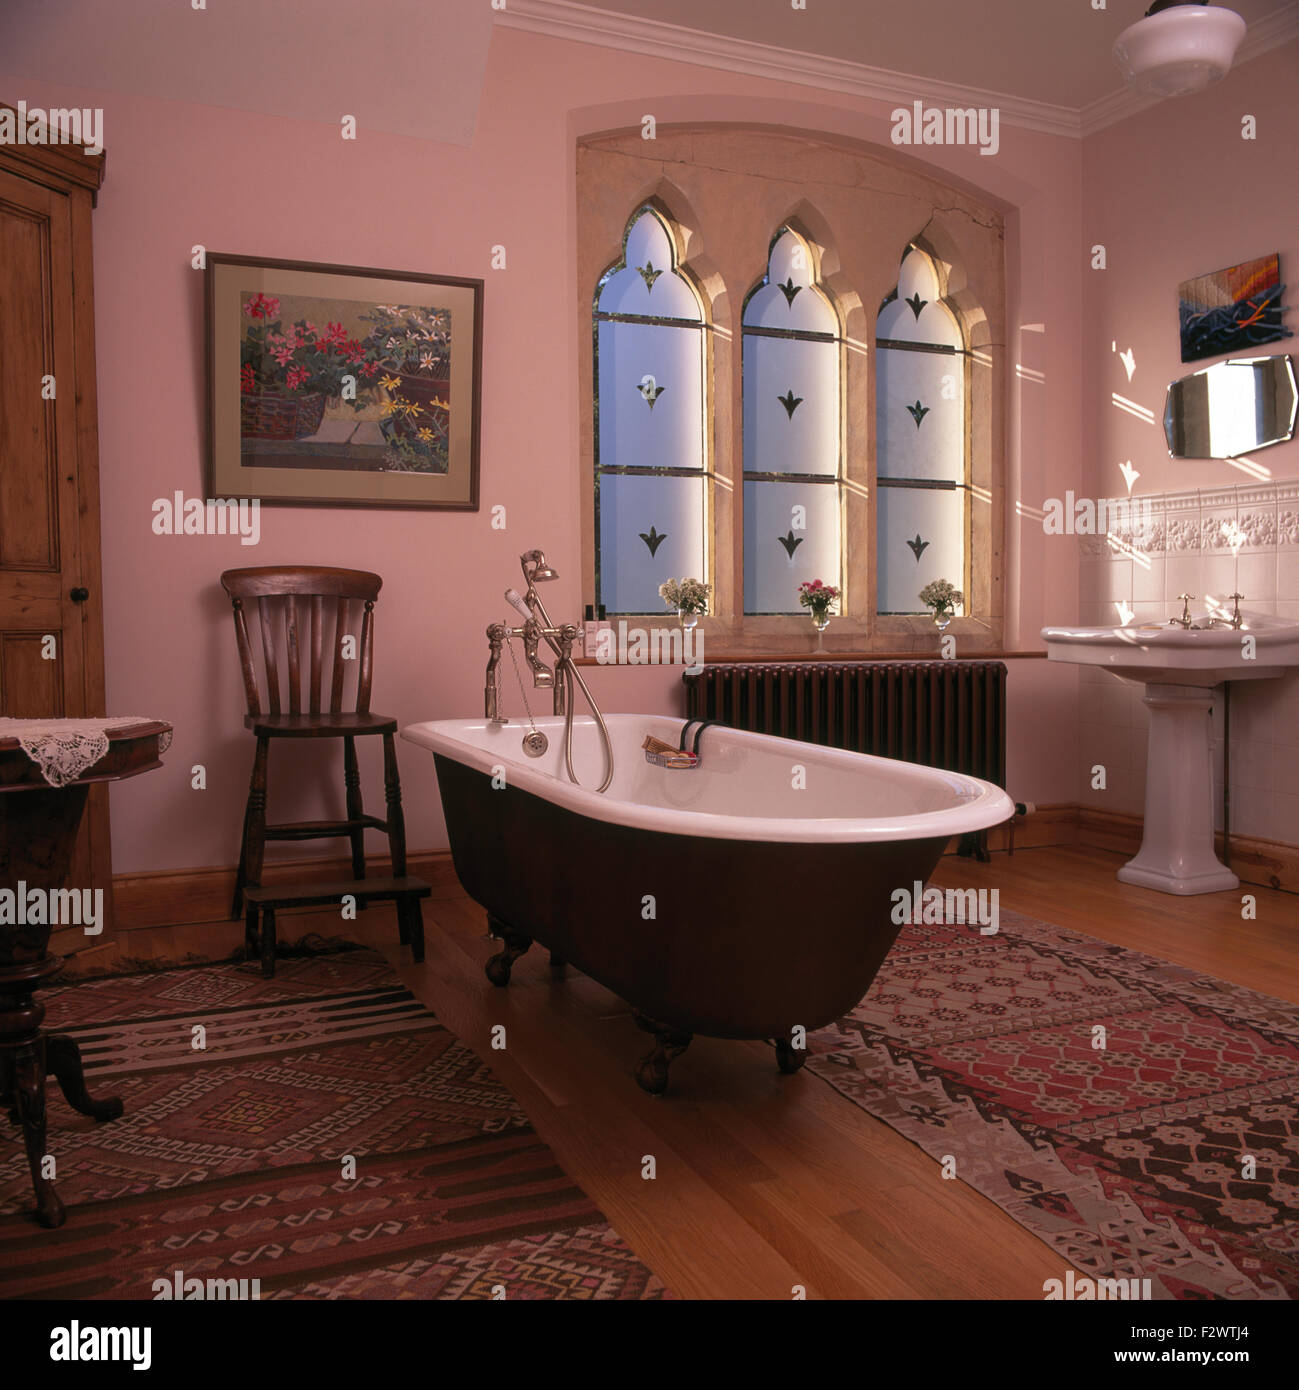 Country Style Bathrooms High Resolution Stock Photography and Images - Alamy